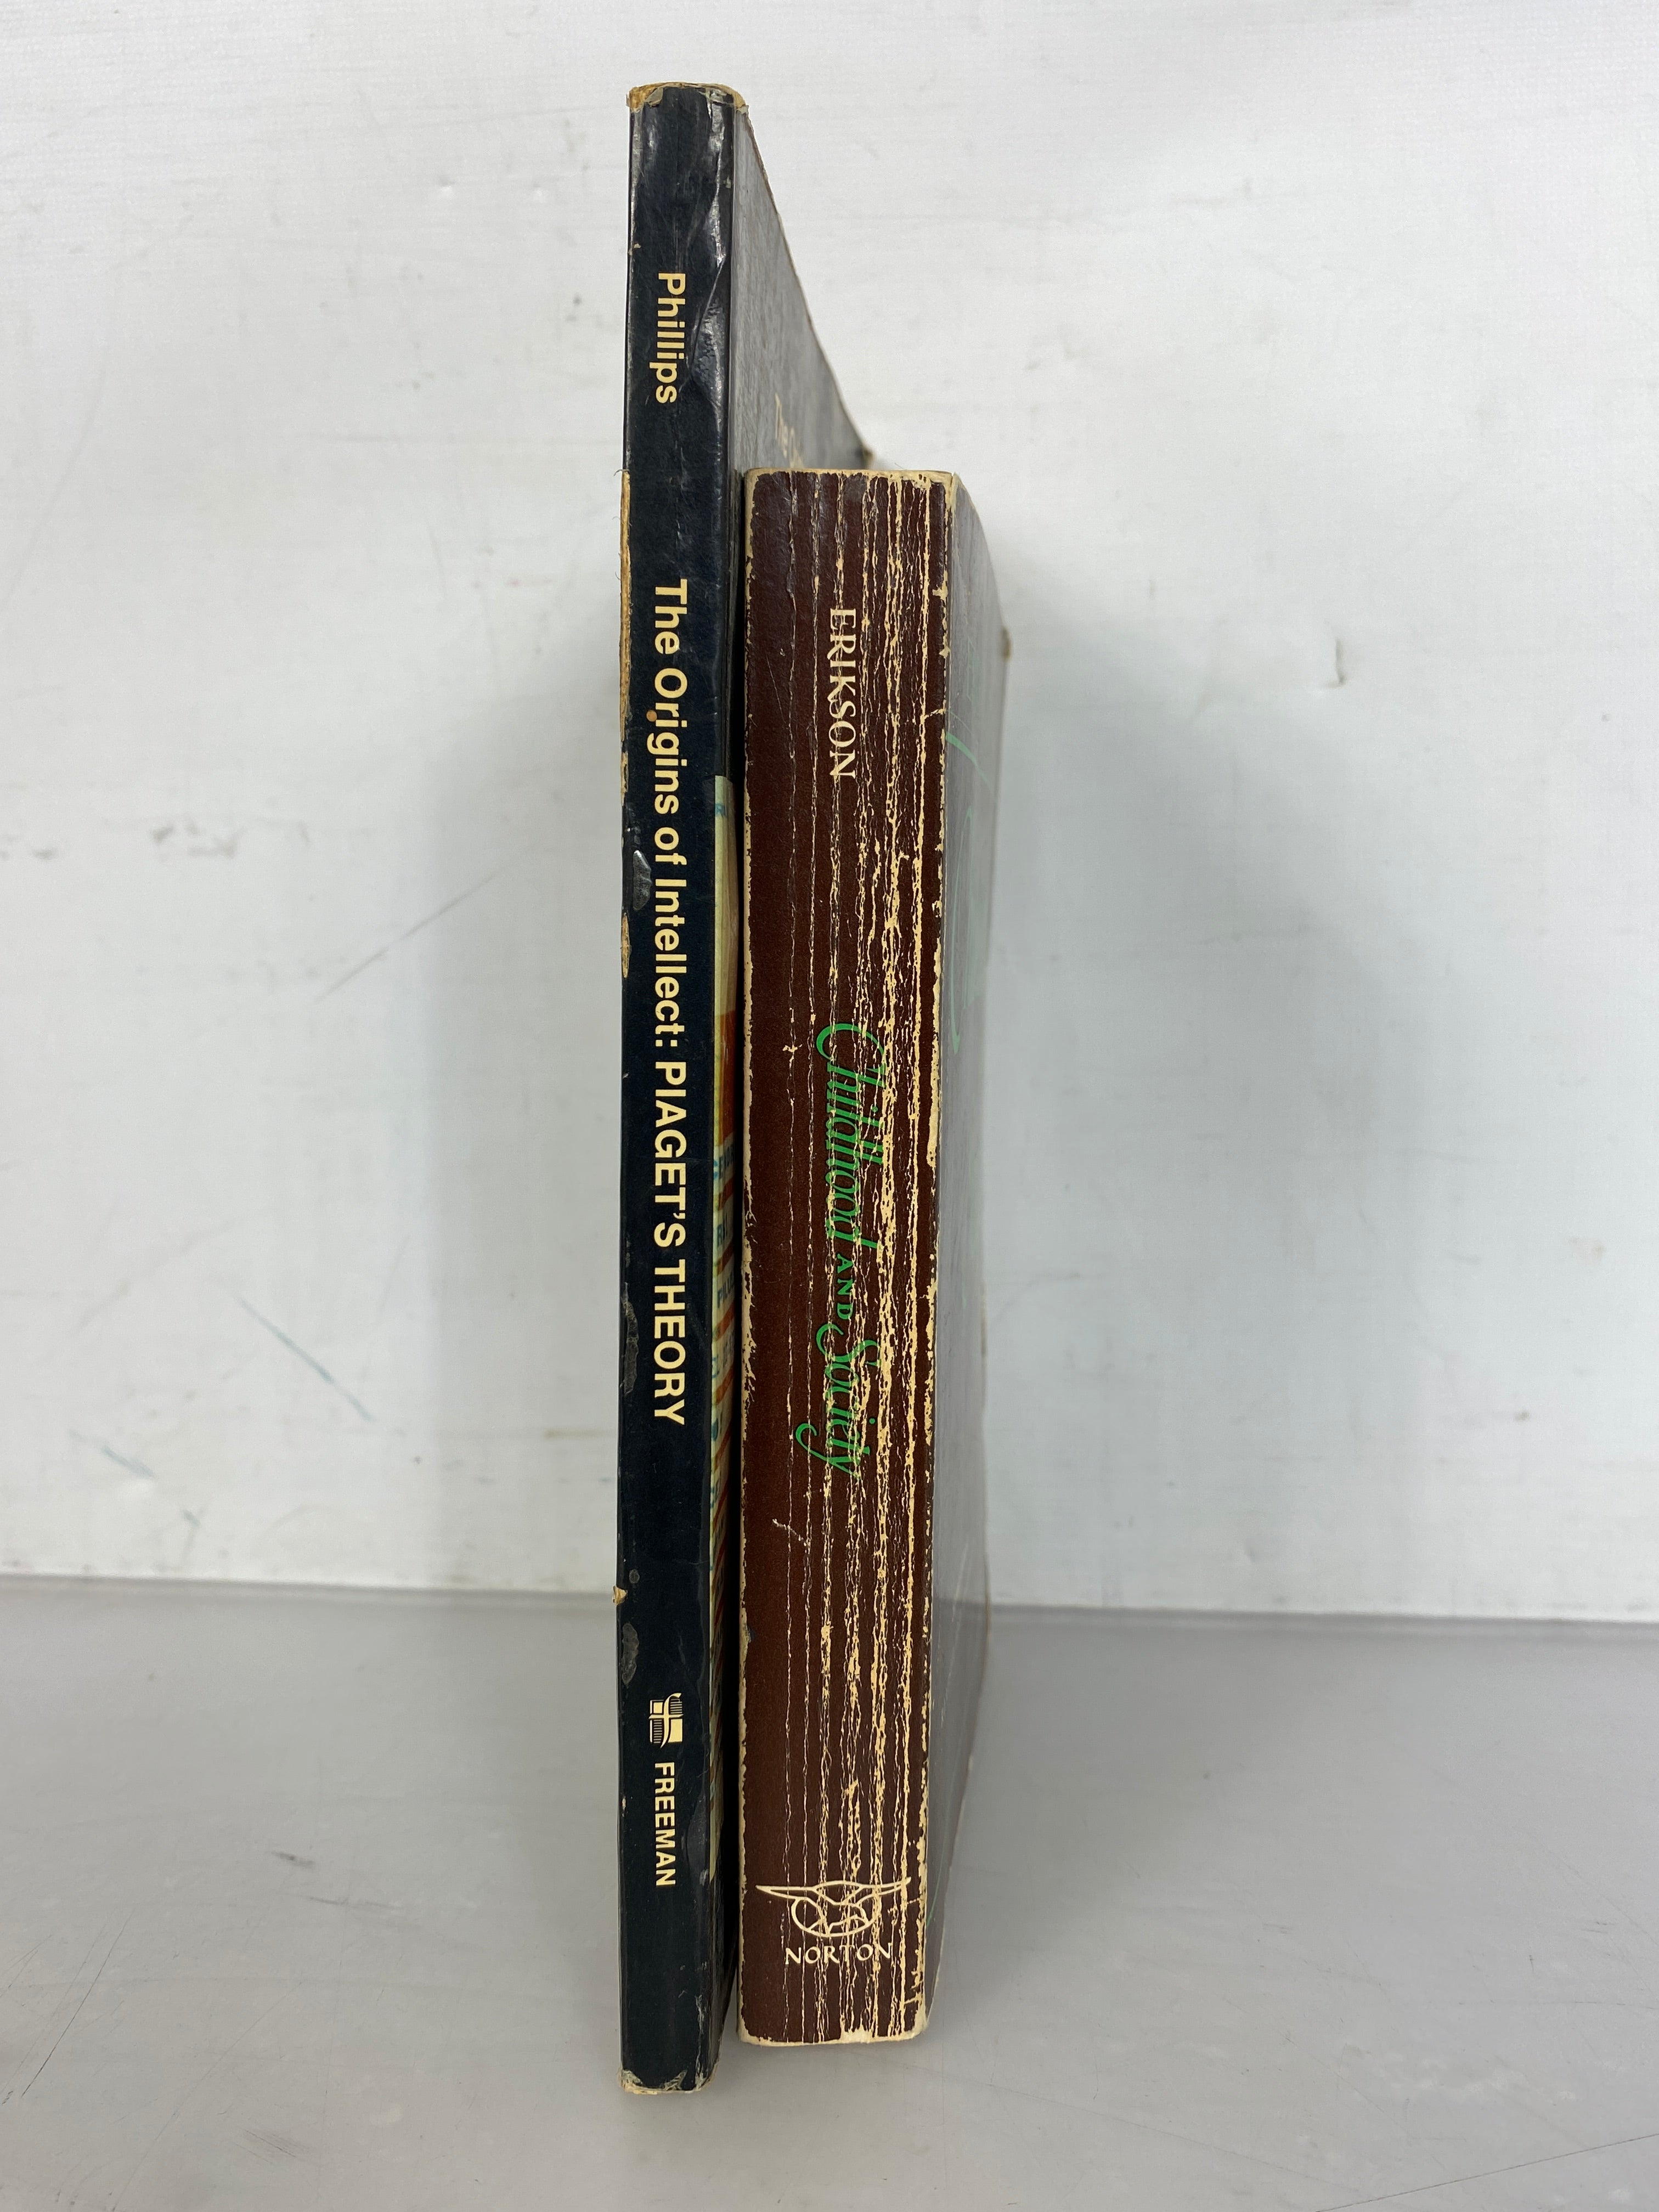 Lot of 2 Childhood and Society/Origins of Intellect Piaget's Theory 1963-1969 SC